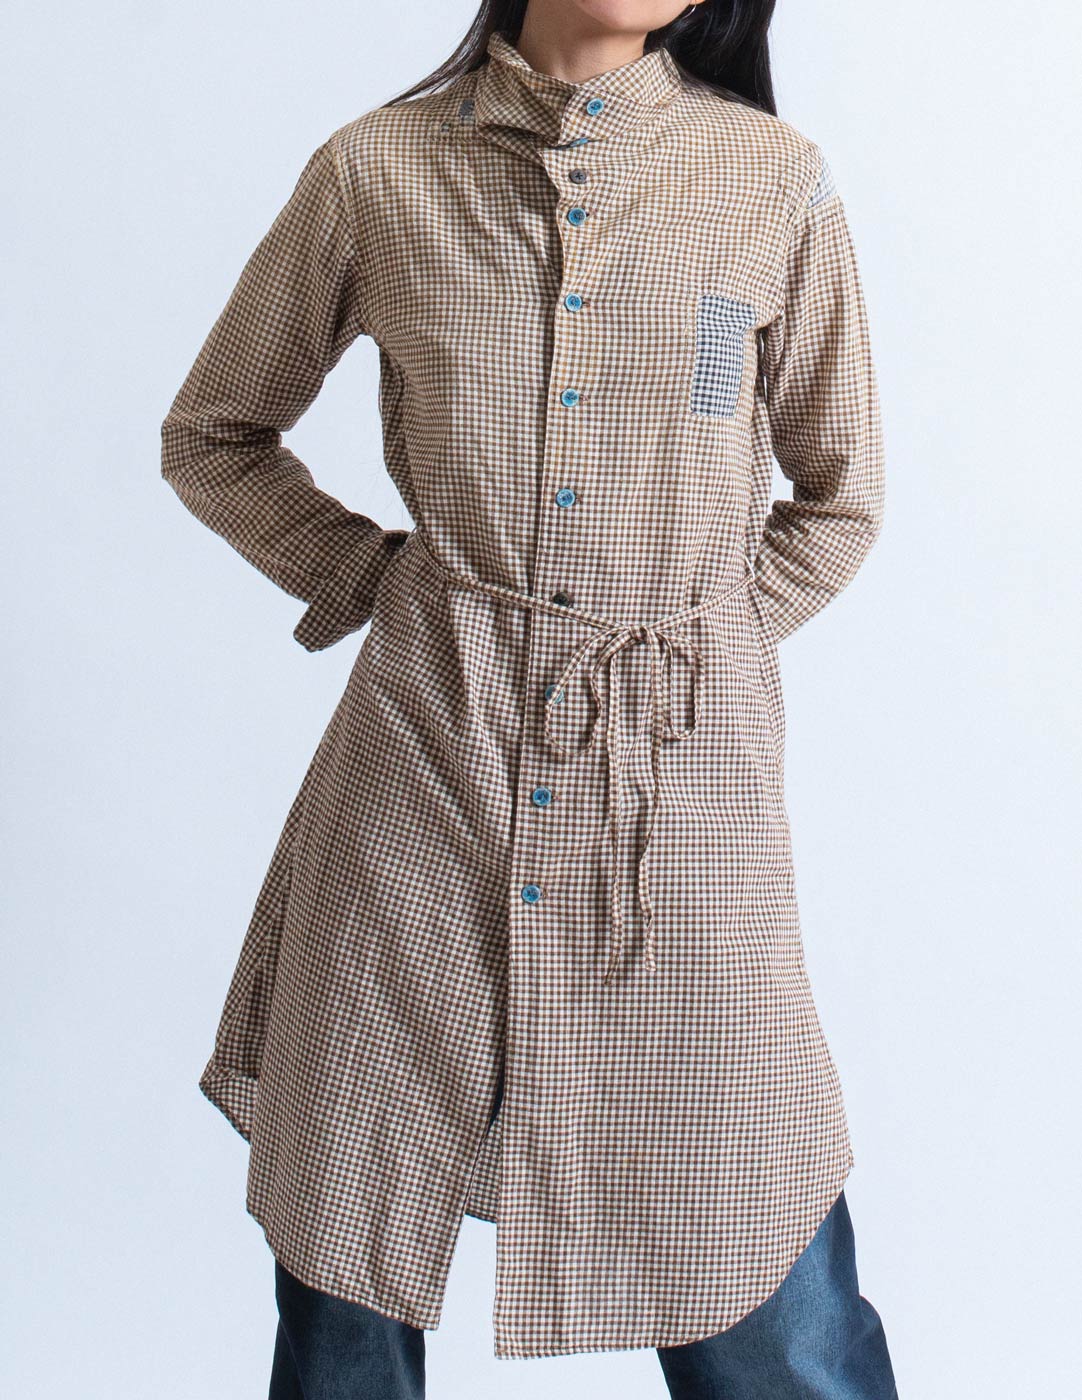 Kapital brown gingham shirt dress with patchwork front detail